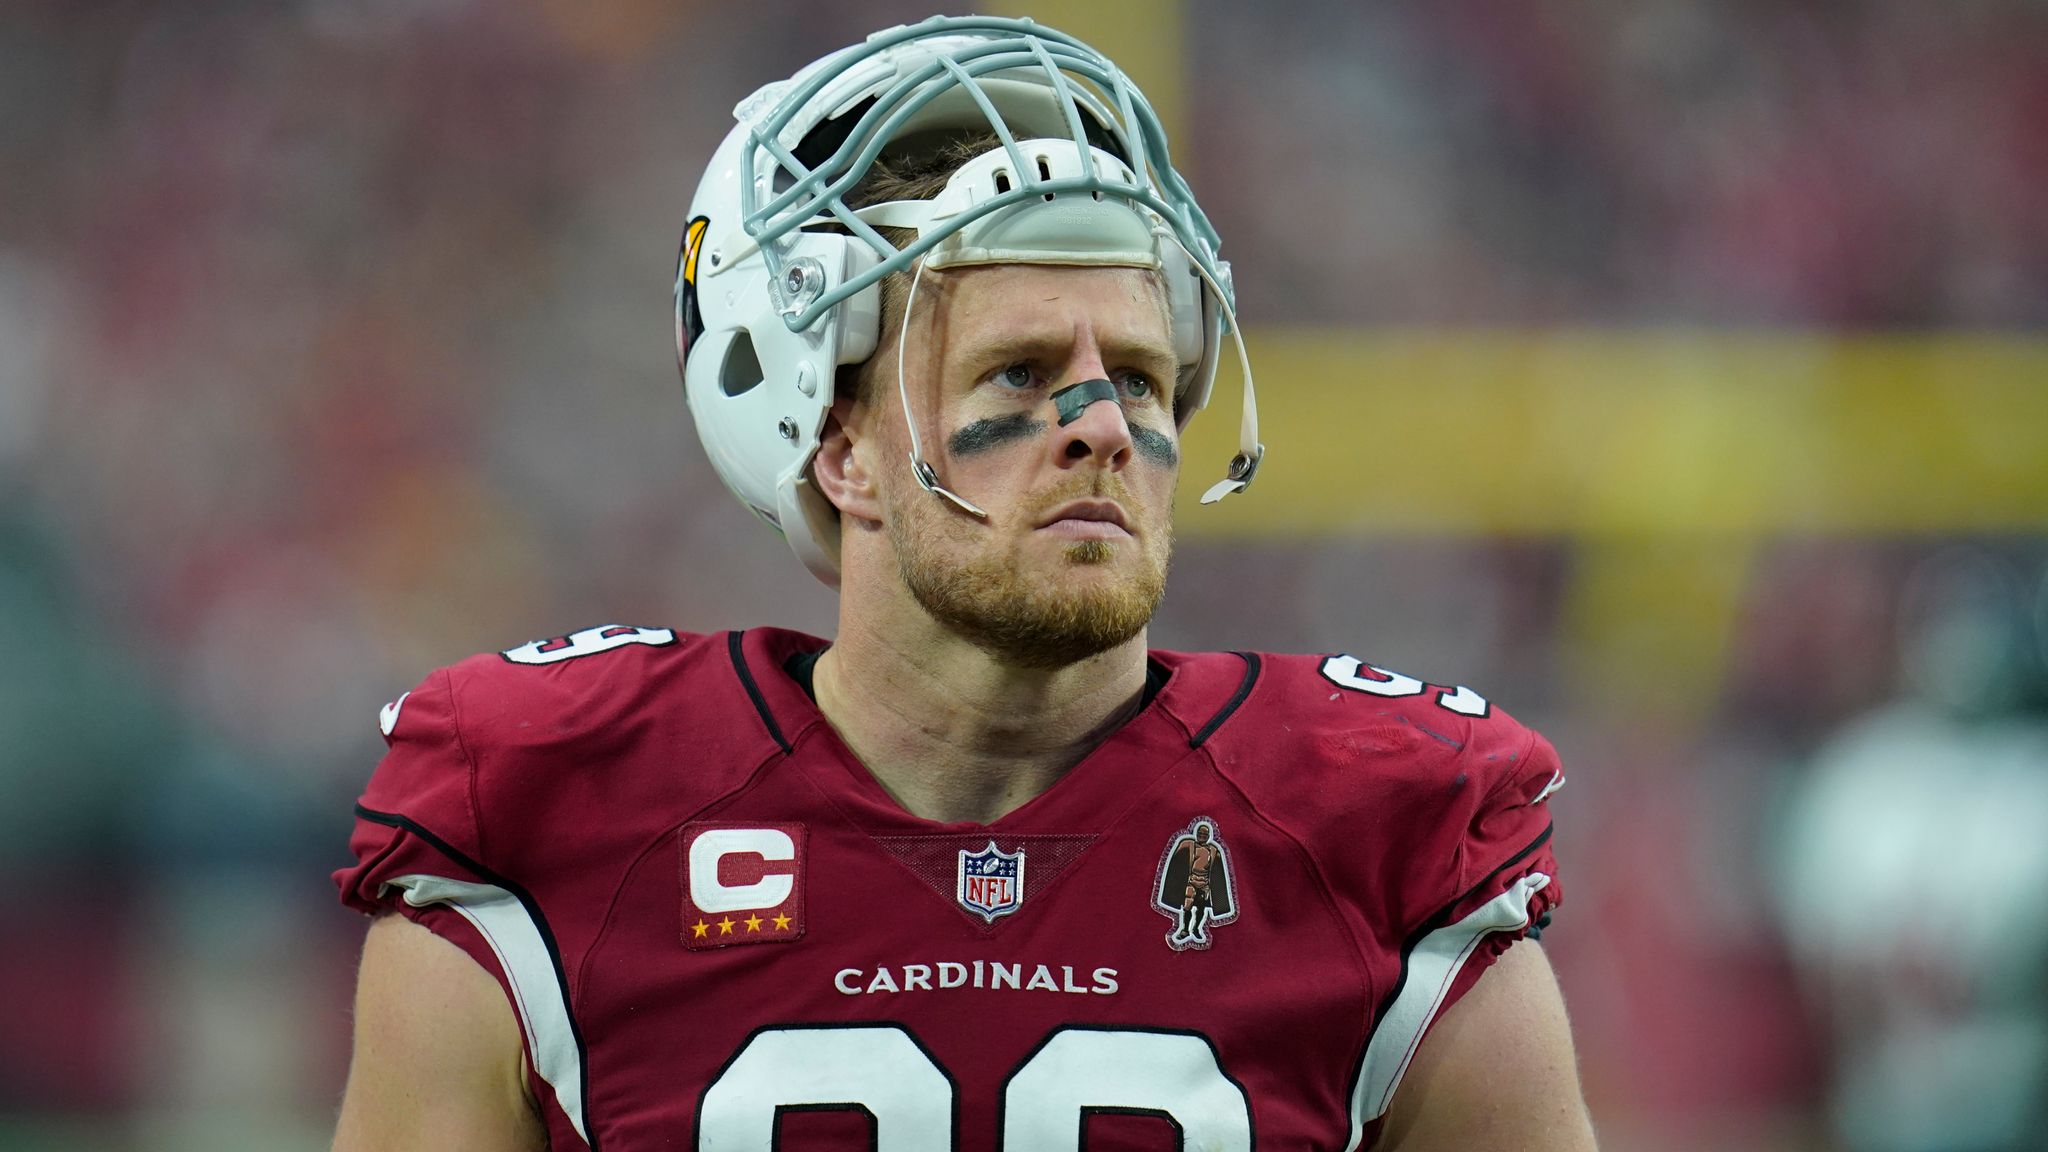 J.J. Watt: Arizona Cardinals defensive end likely out for rest of